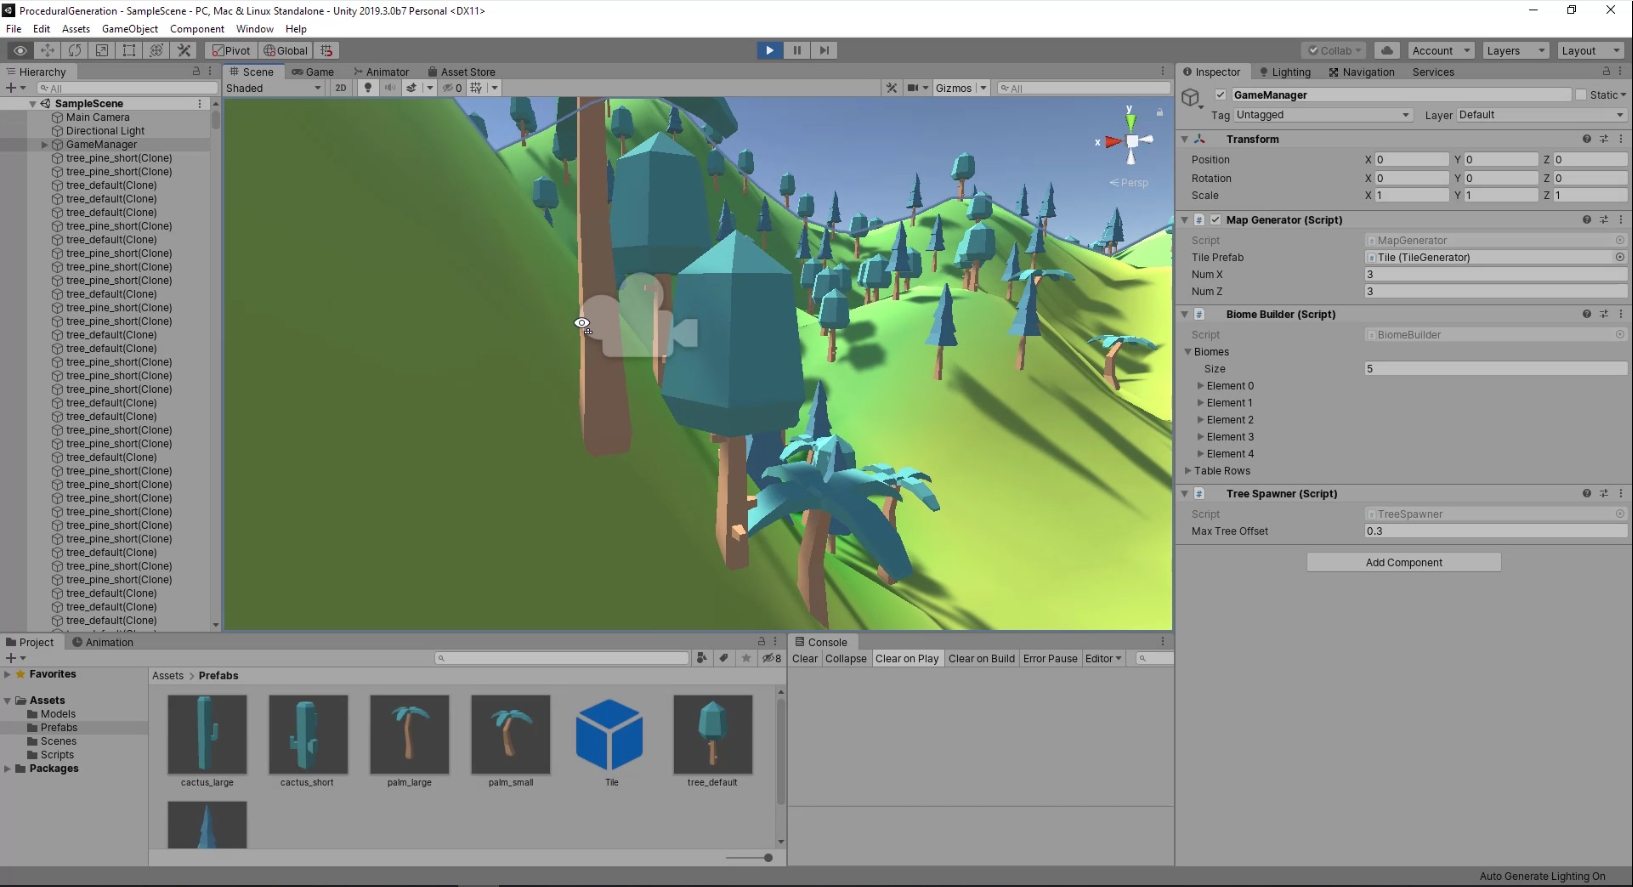 Unity Editor overview